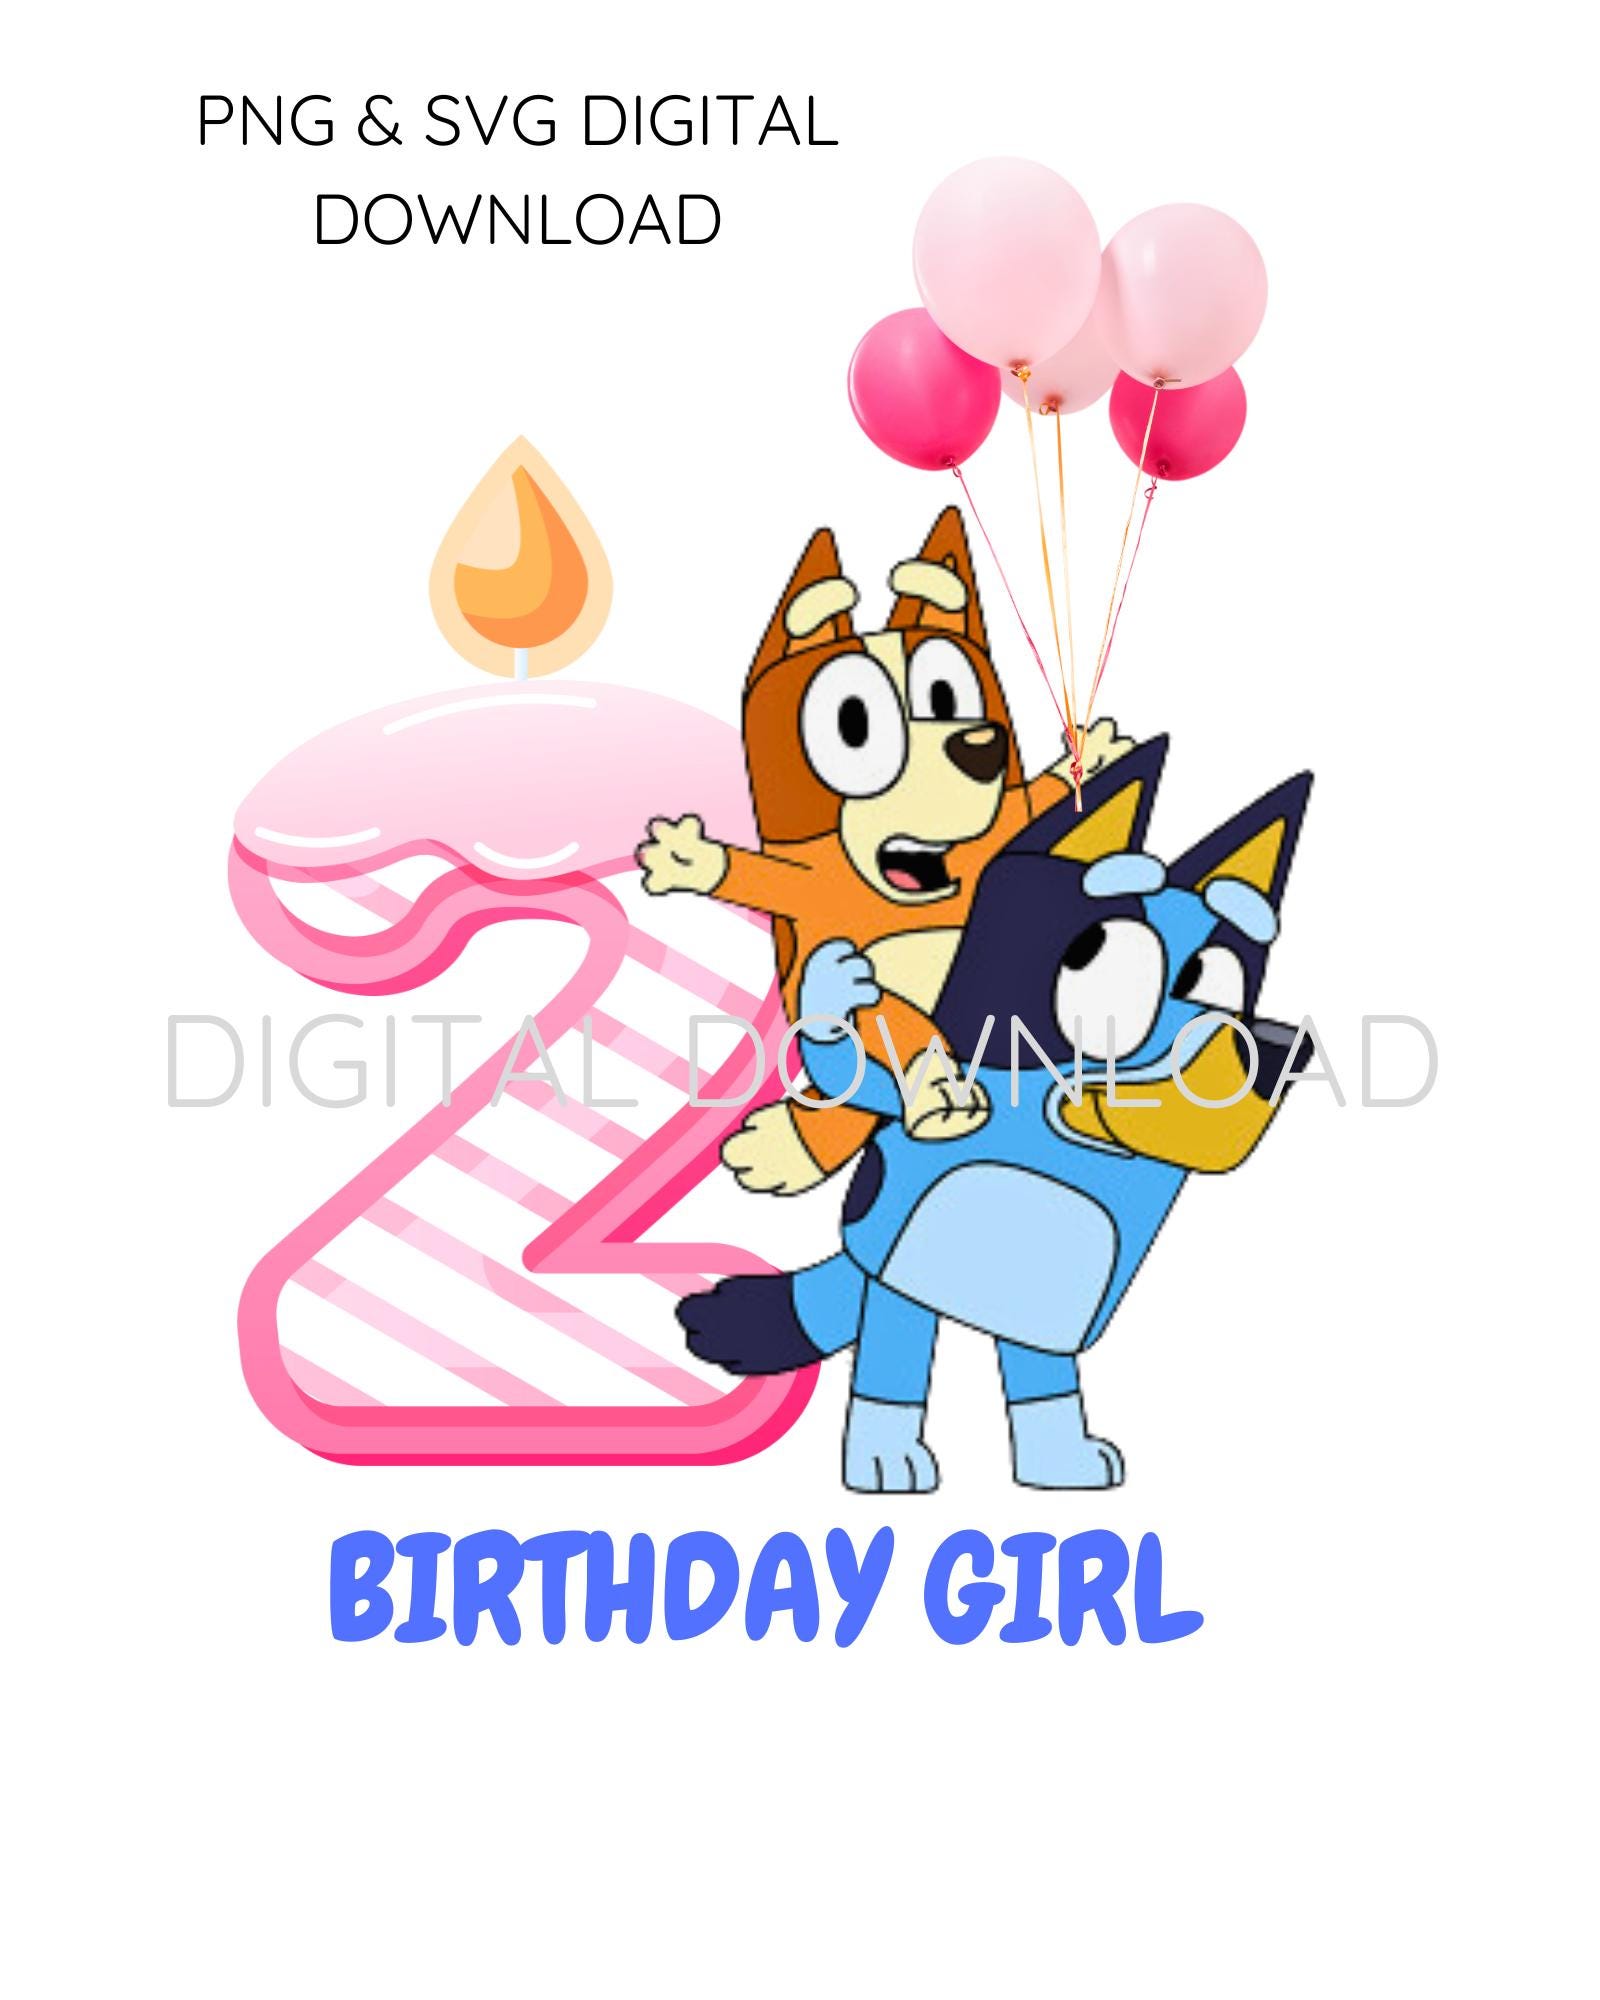 Birthday Girl Digital Instant Download, 2nd birthday PNG & SVG file, Blue-y, Blue Dog character